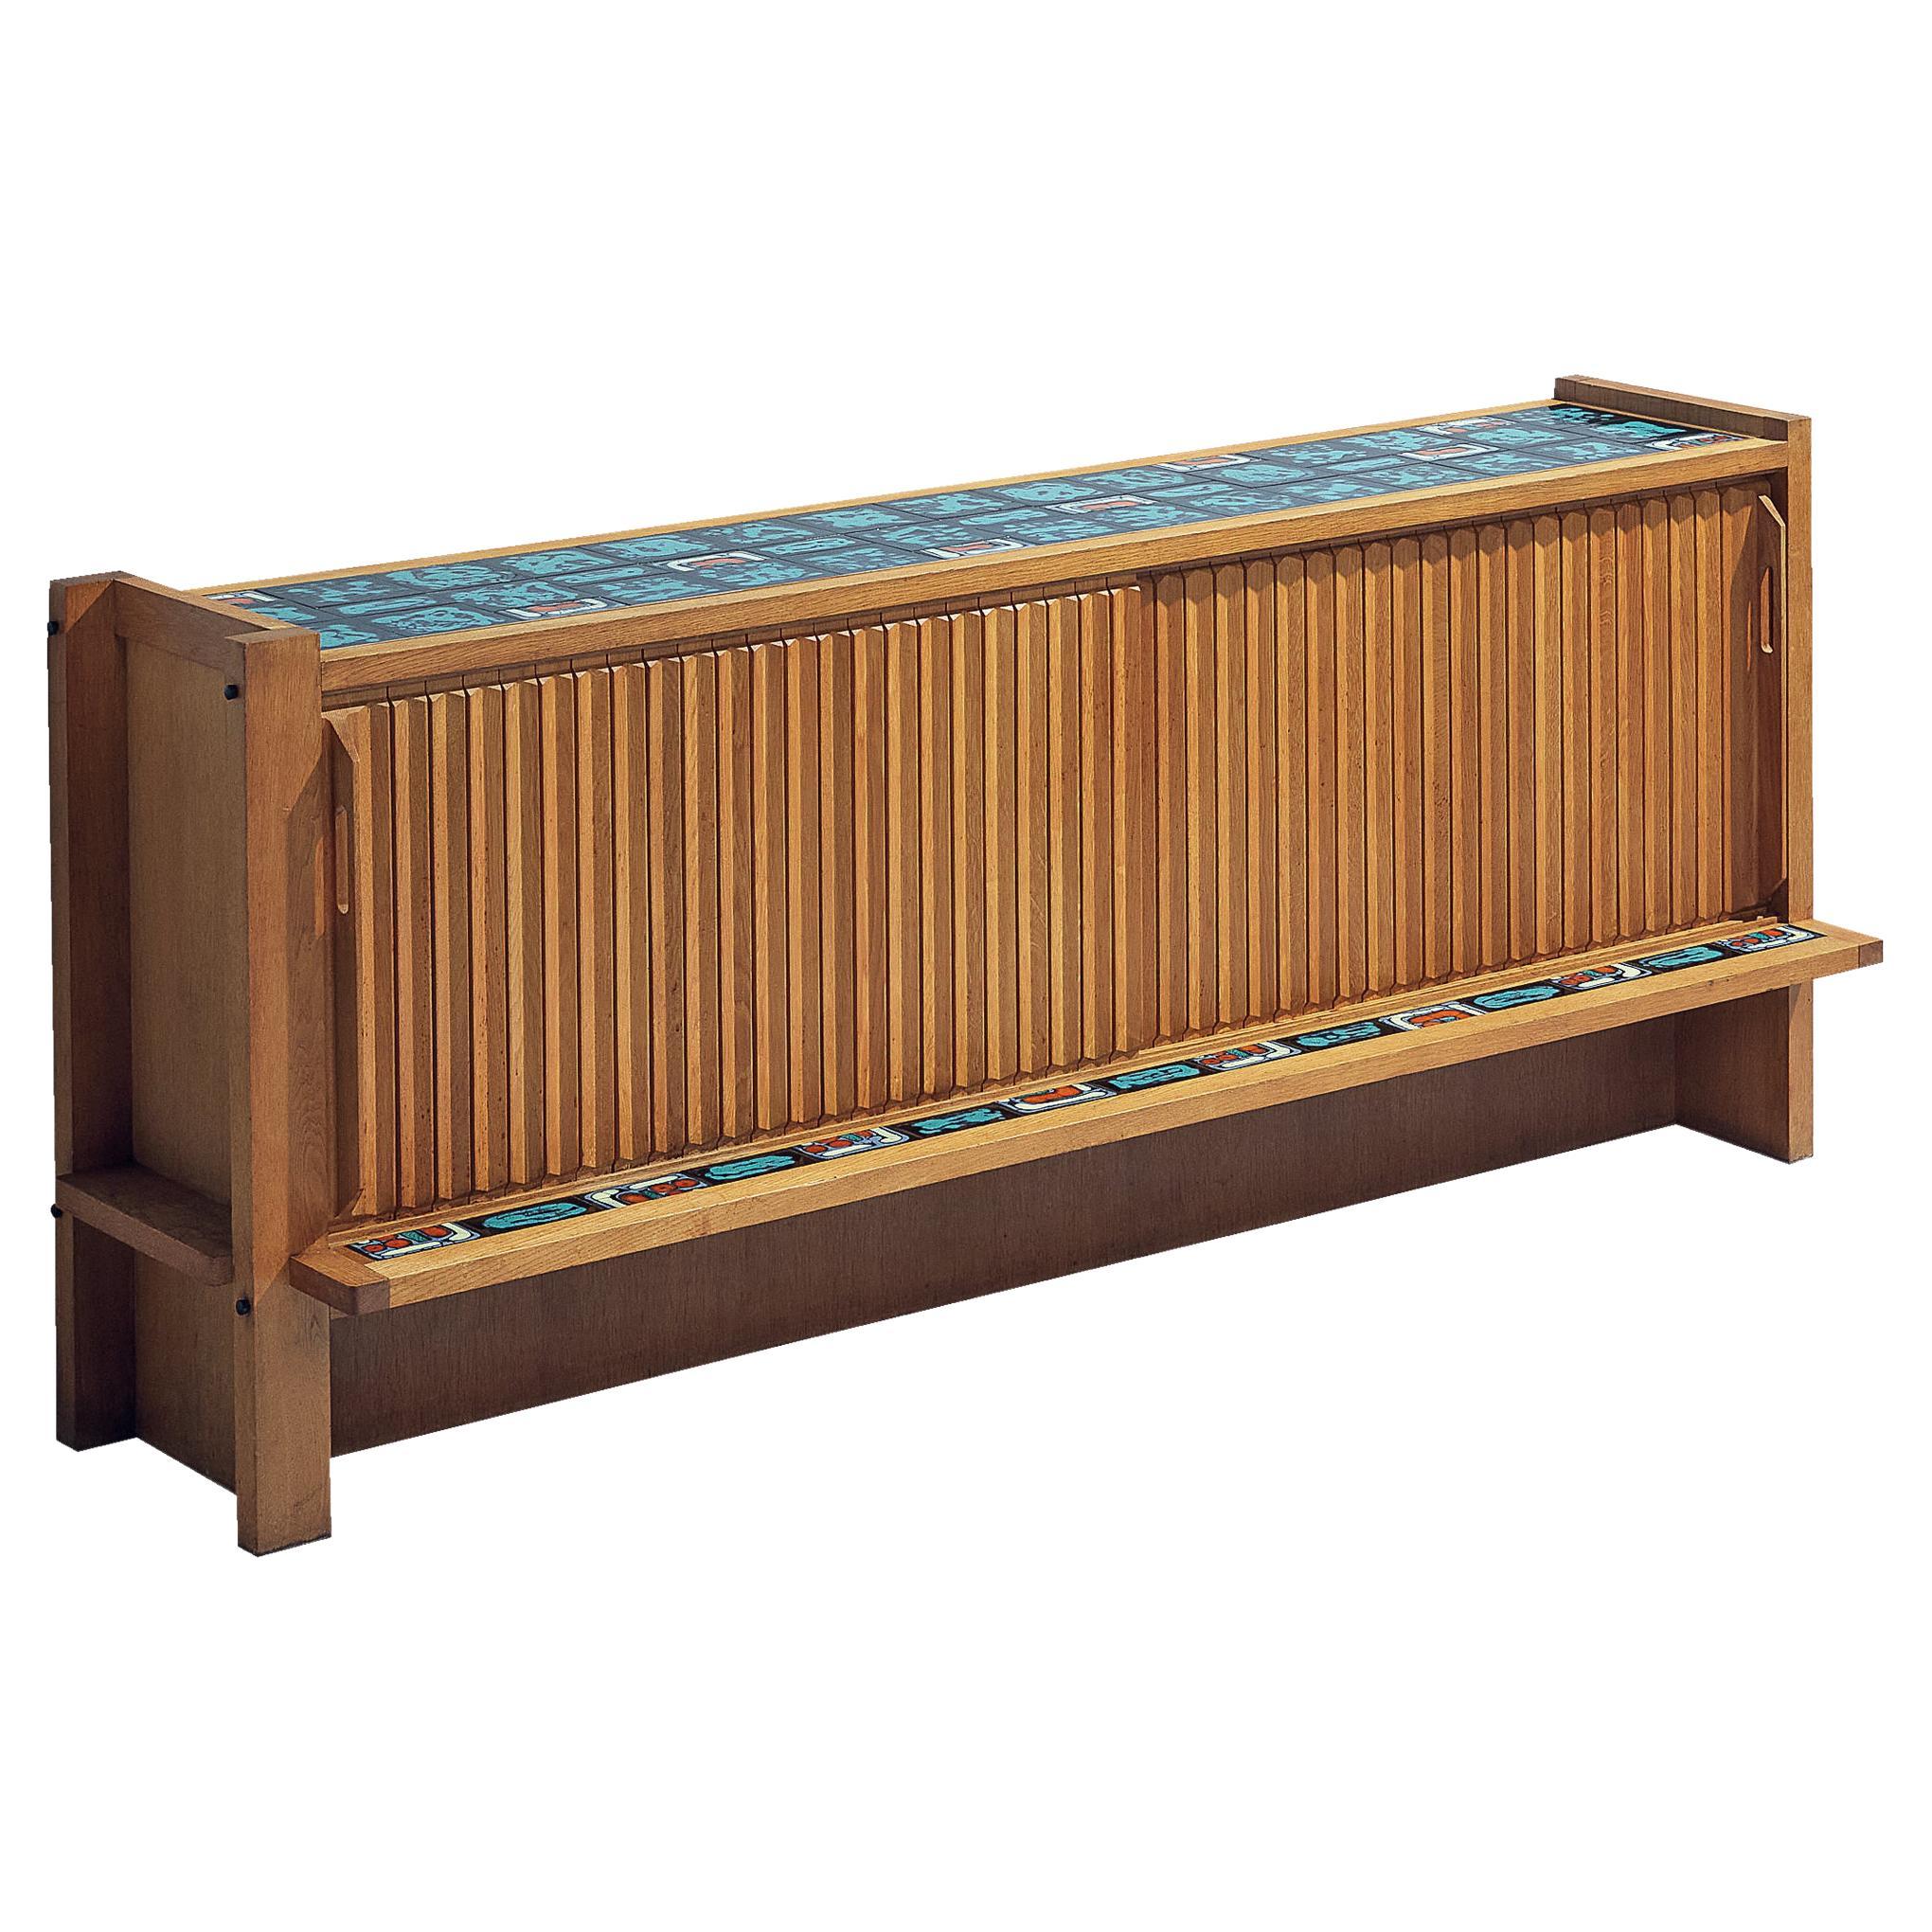 Guillerme et Chambron Sideboard in Solid Oak with Turquoise Ceramic Tiles